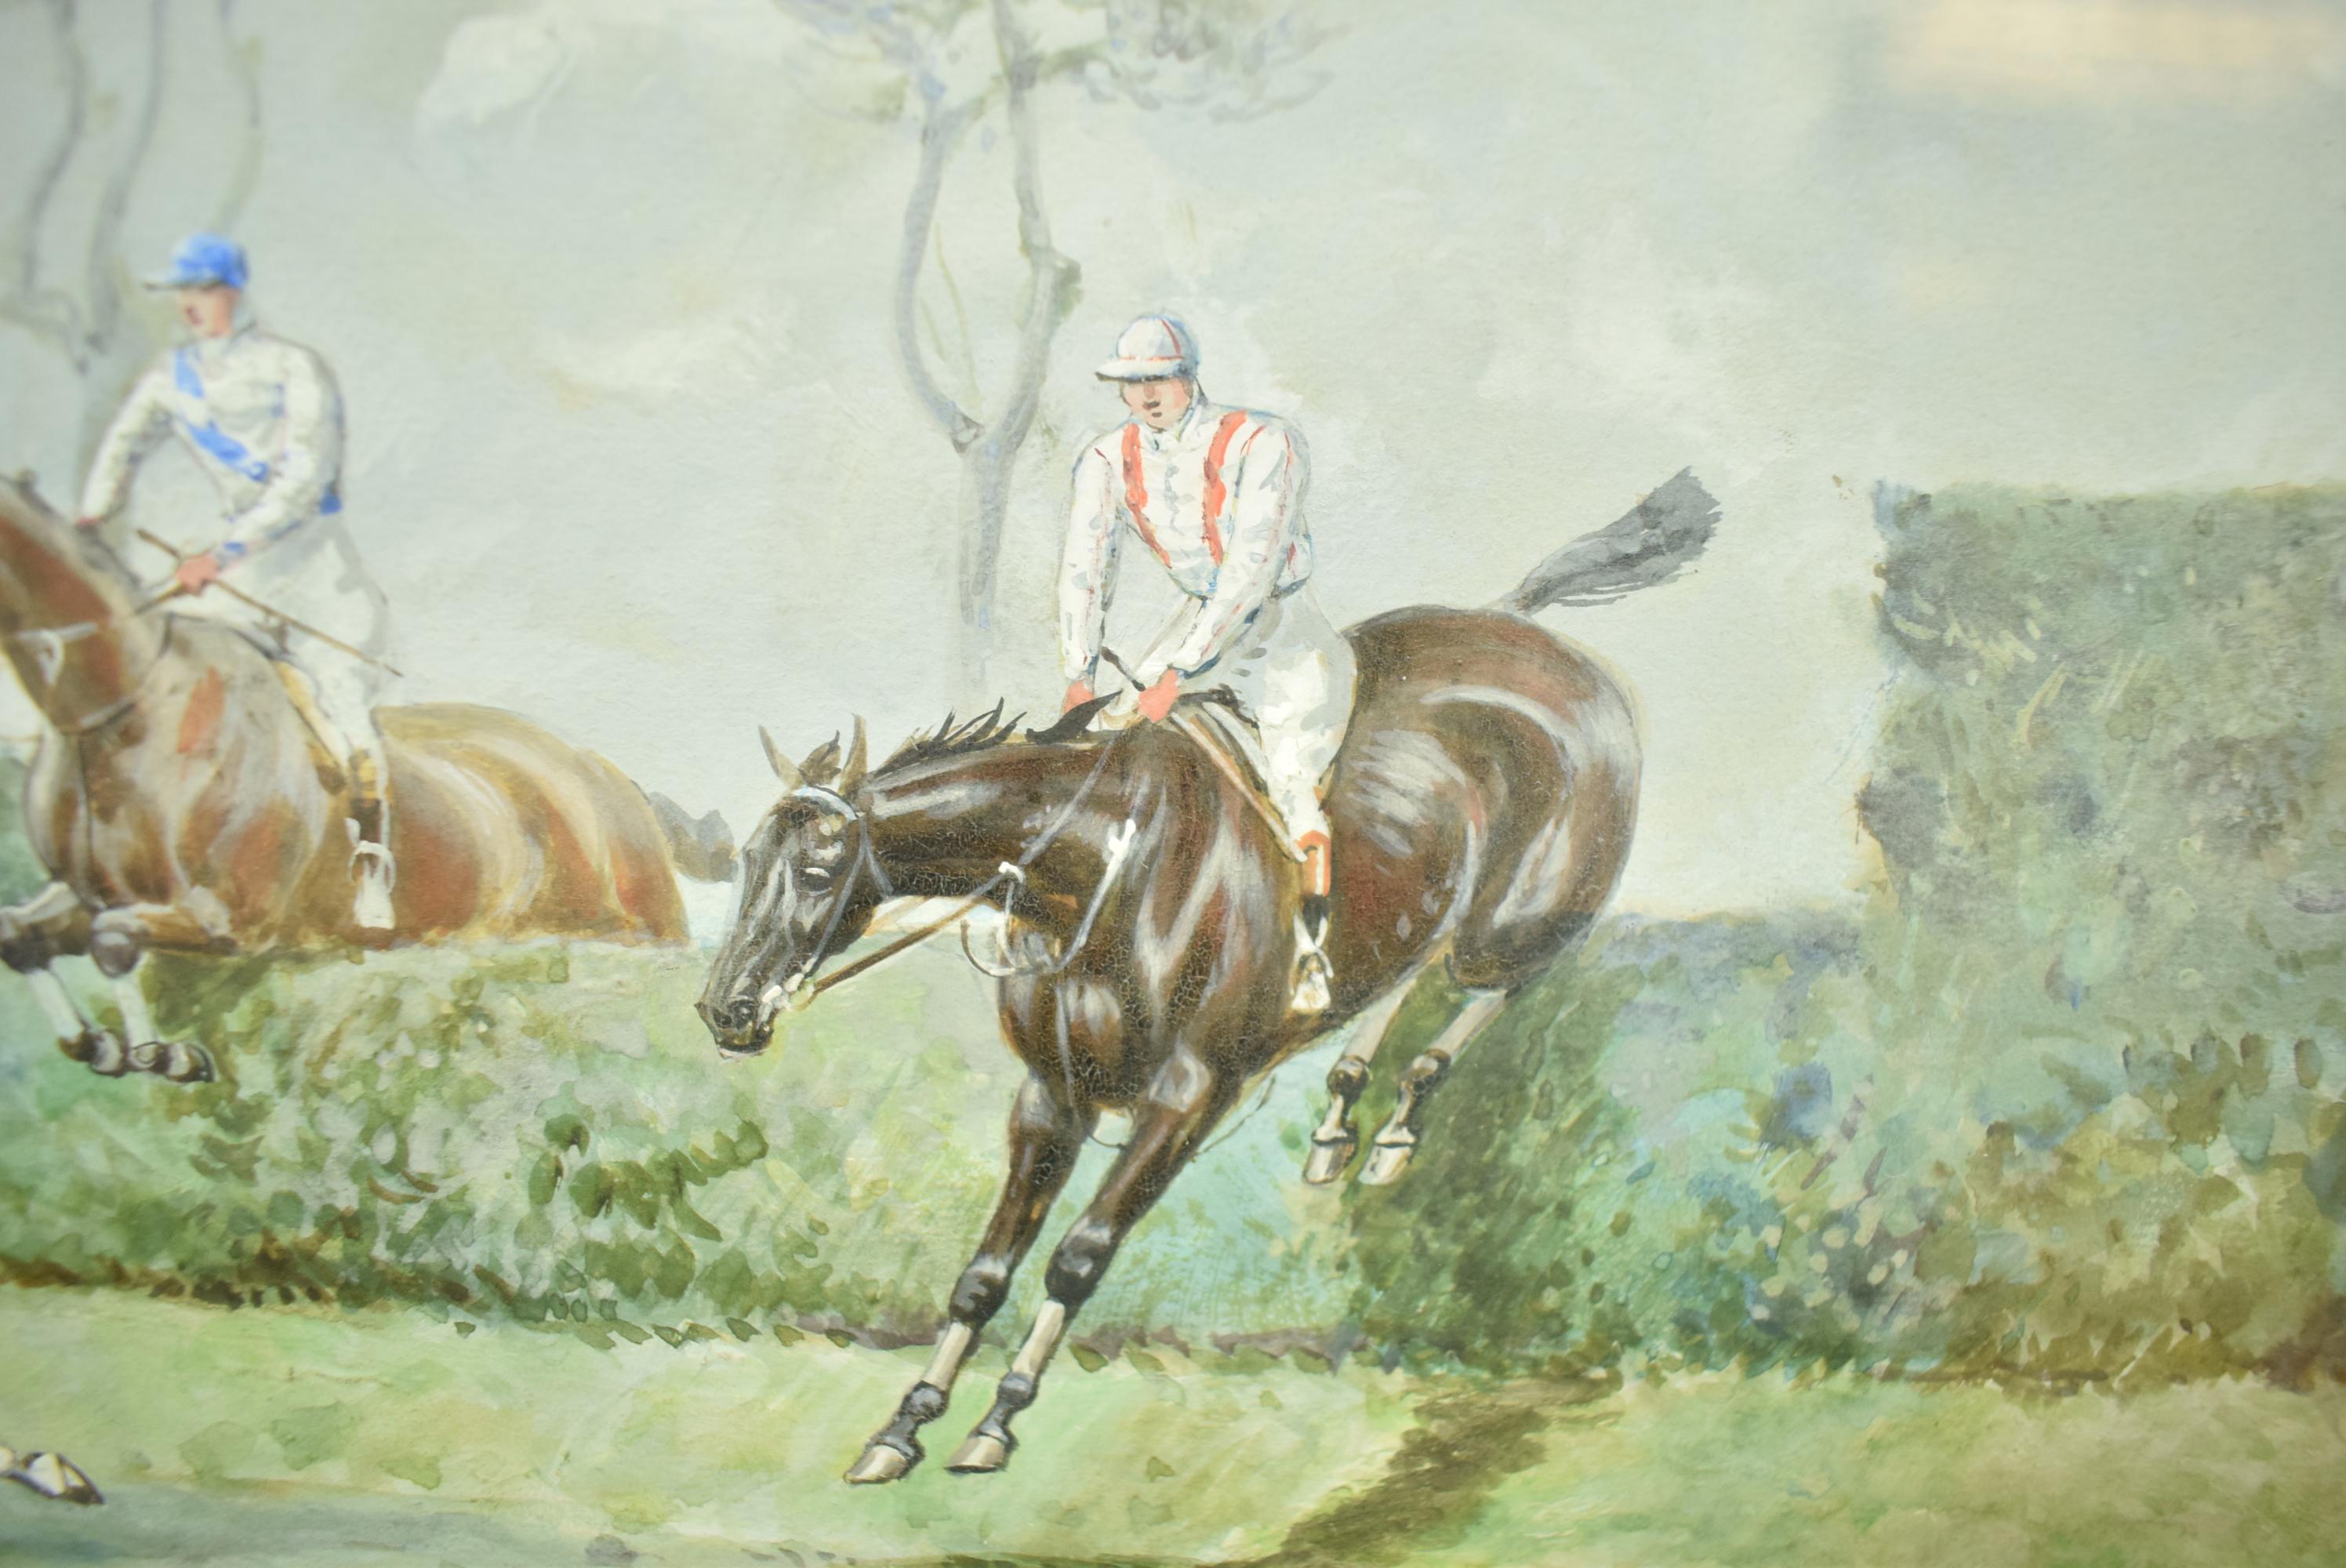 Classic steeplechase gouache by John Beer (1860-1930) signed (LL) of 'The Grand Military Gold Cup, Sandown Park 1905

Art Sz: 9 3/4